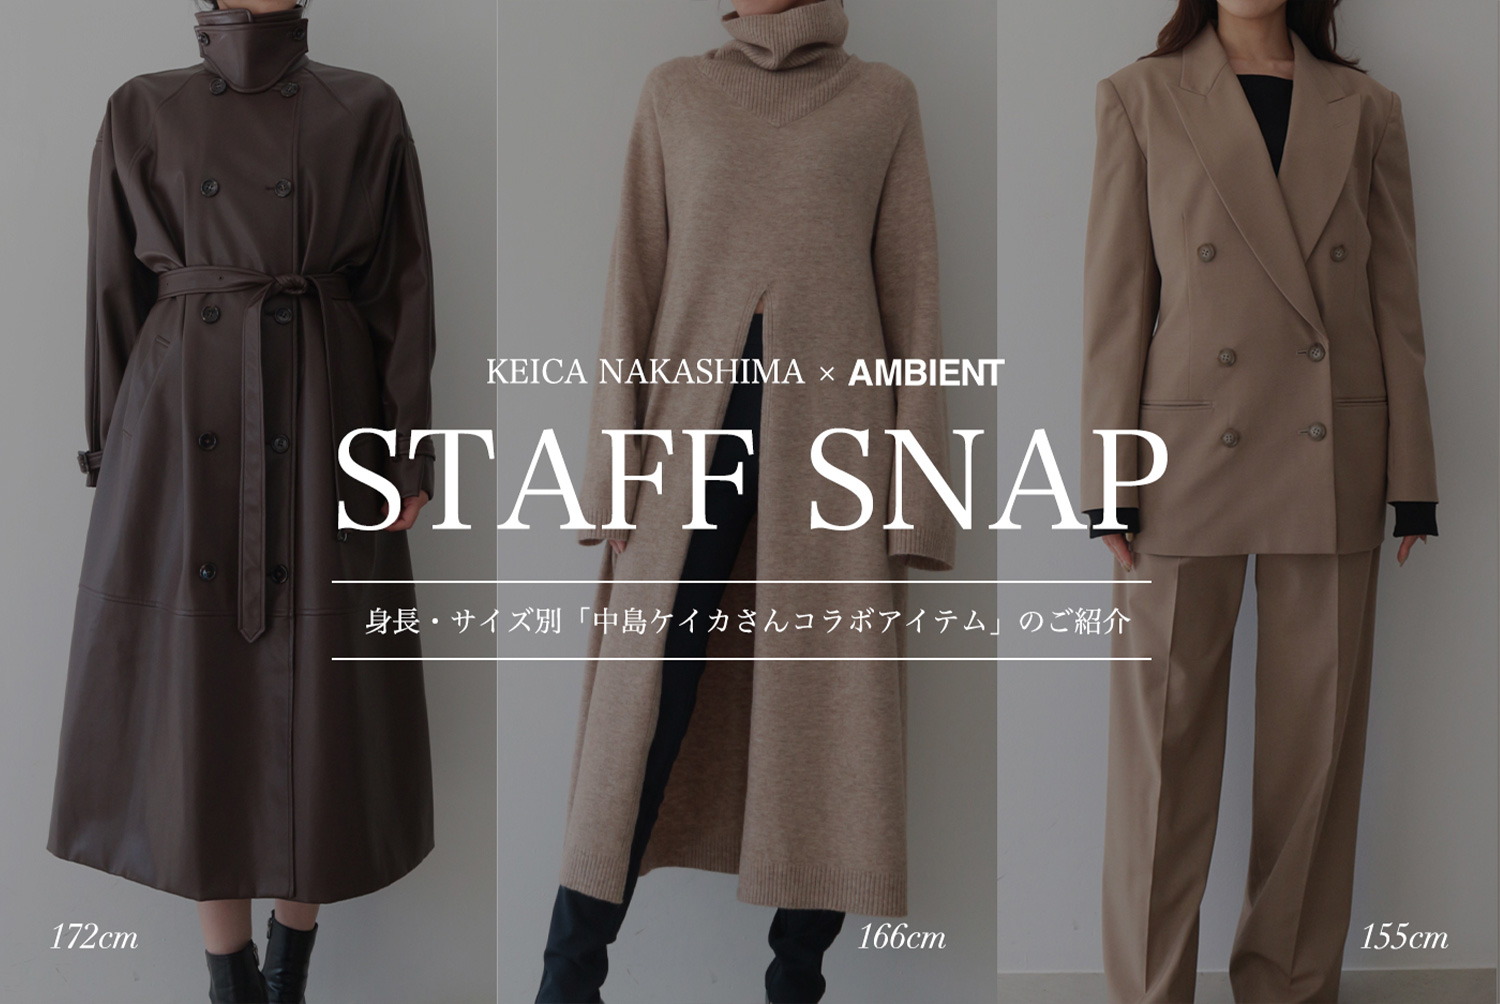 KEICA NAKASHIMA × AMBIENT STAFF SNAP｜アンビエント公式通販サイト